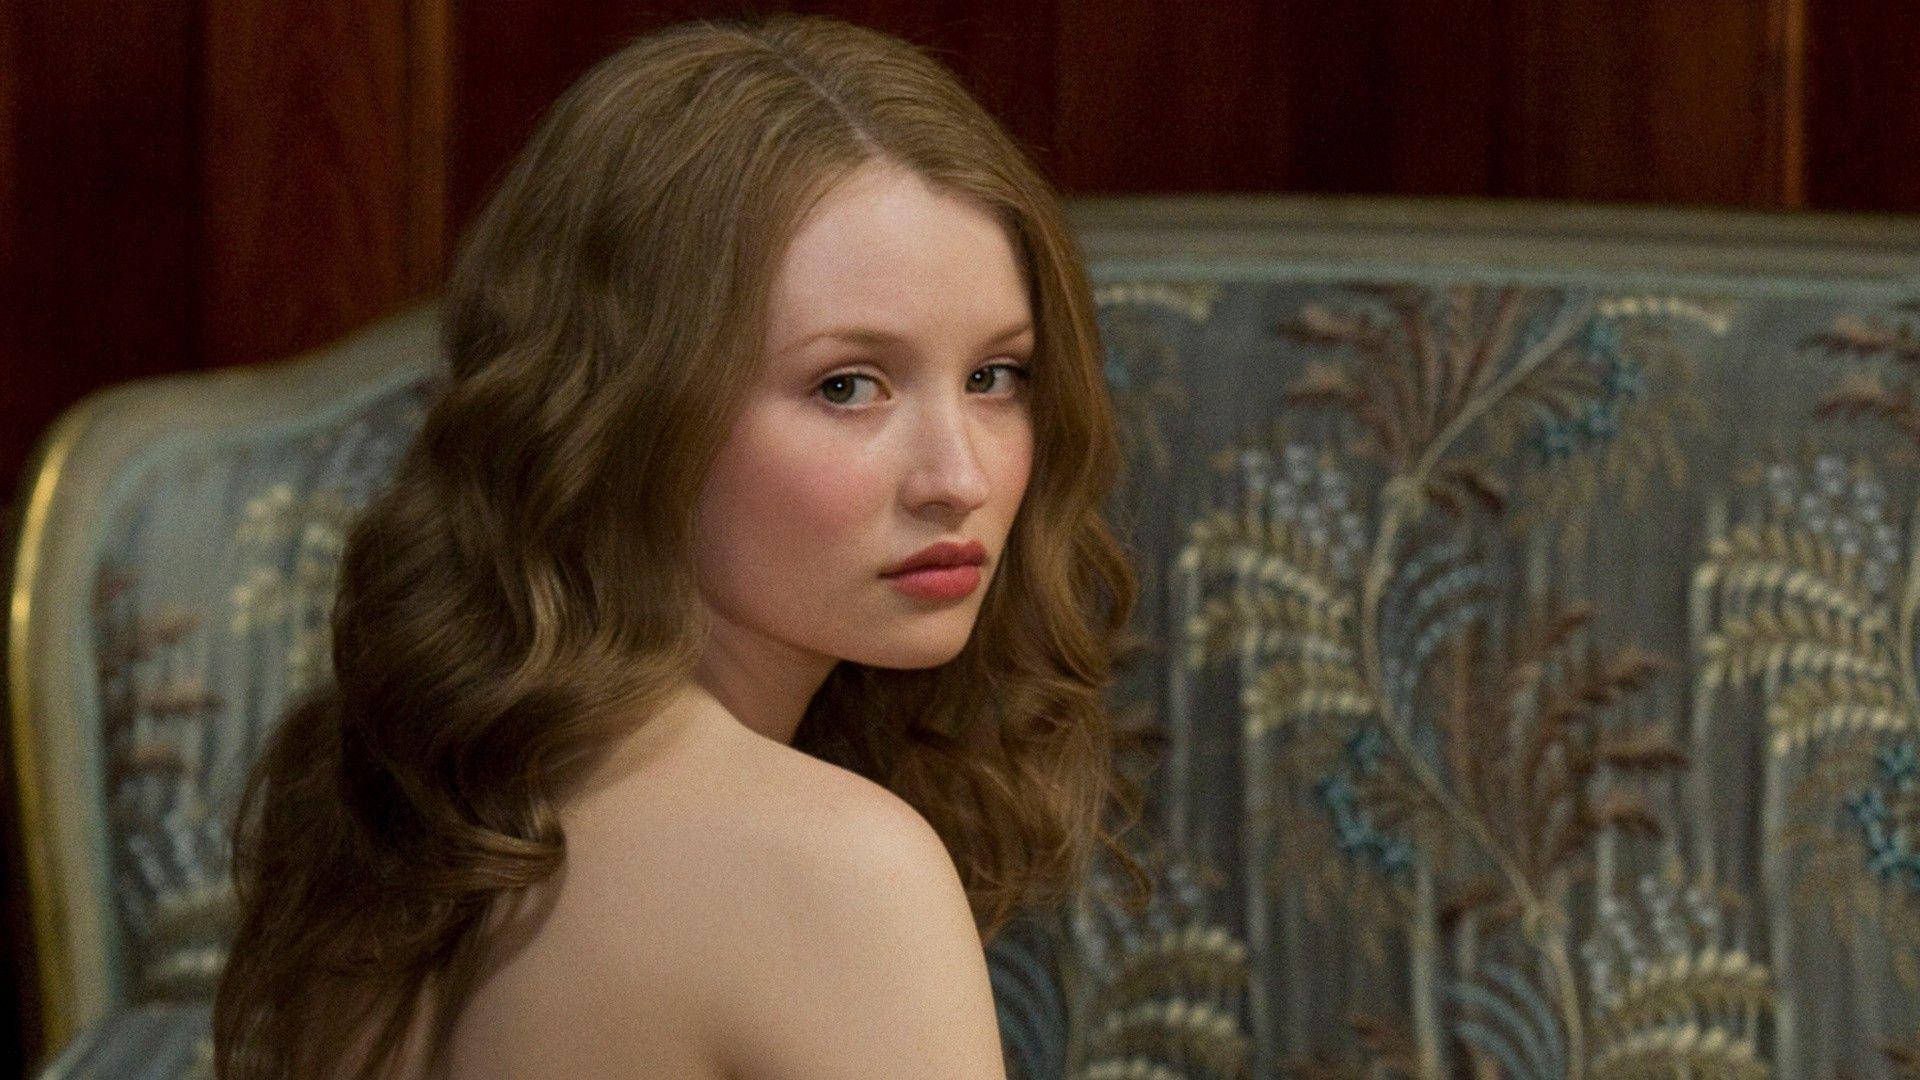 Australian Actress Emily Browning As Lucy 2011 Sleeping Beauty Movie Wallpaper